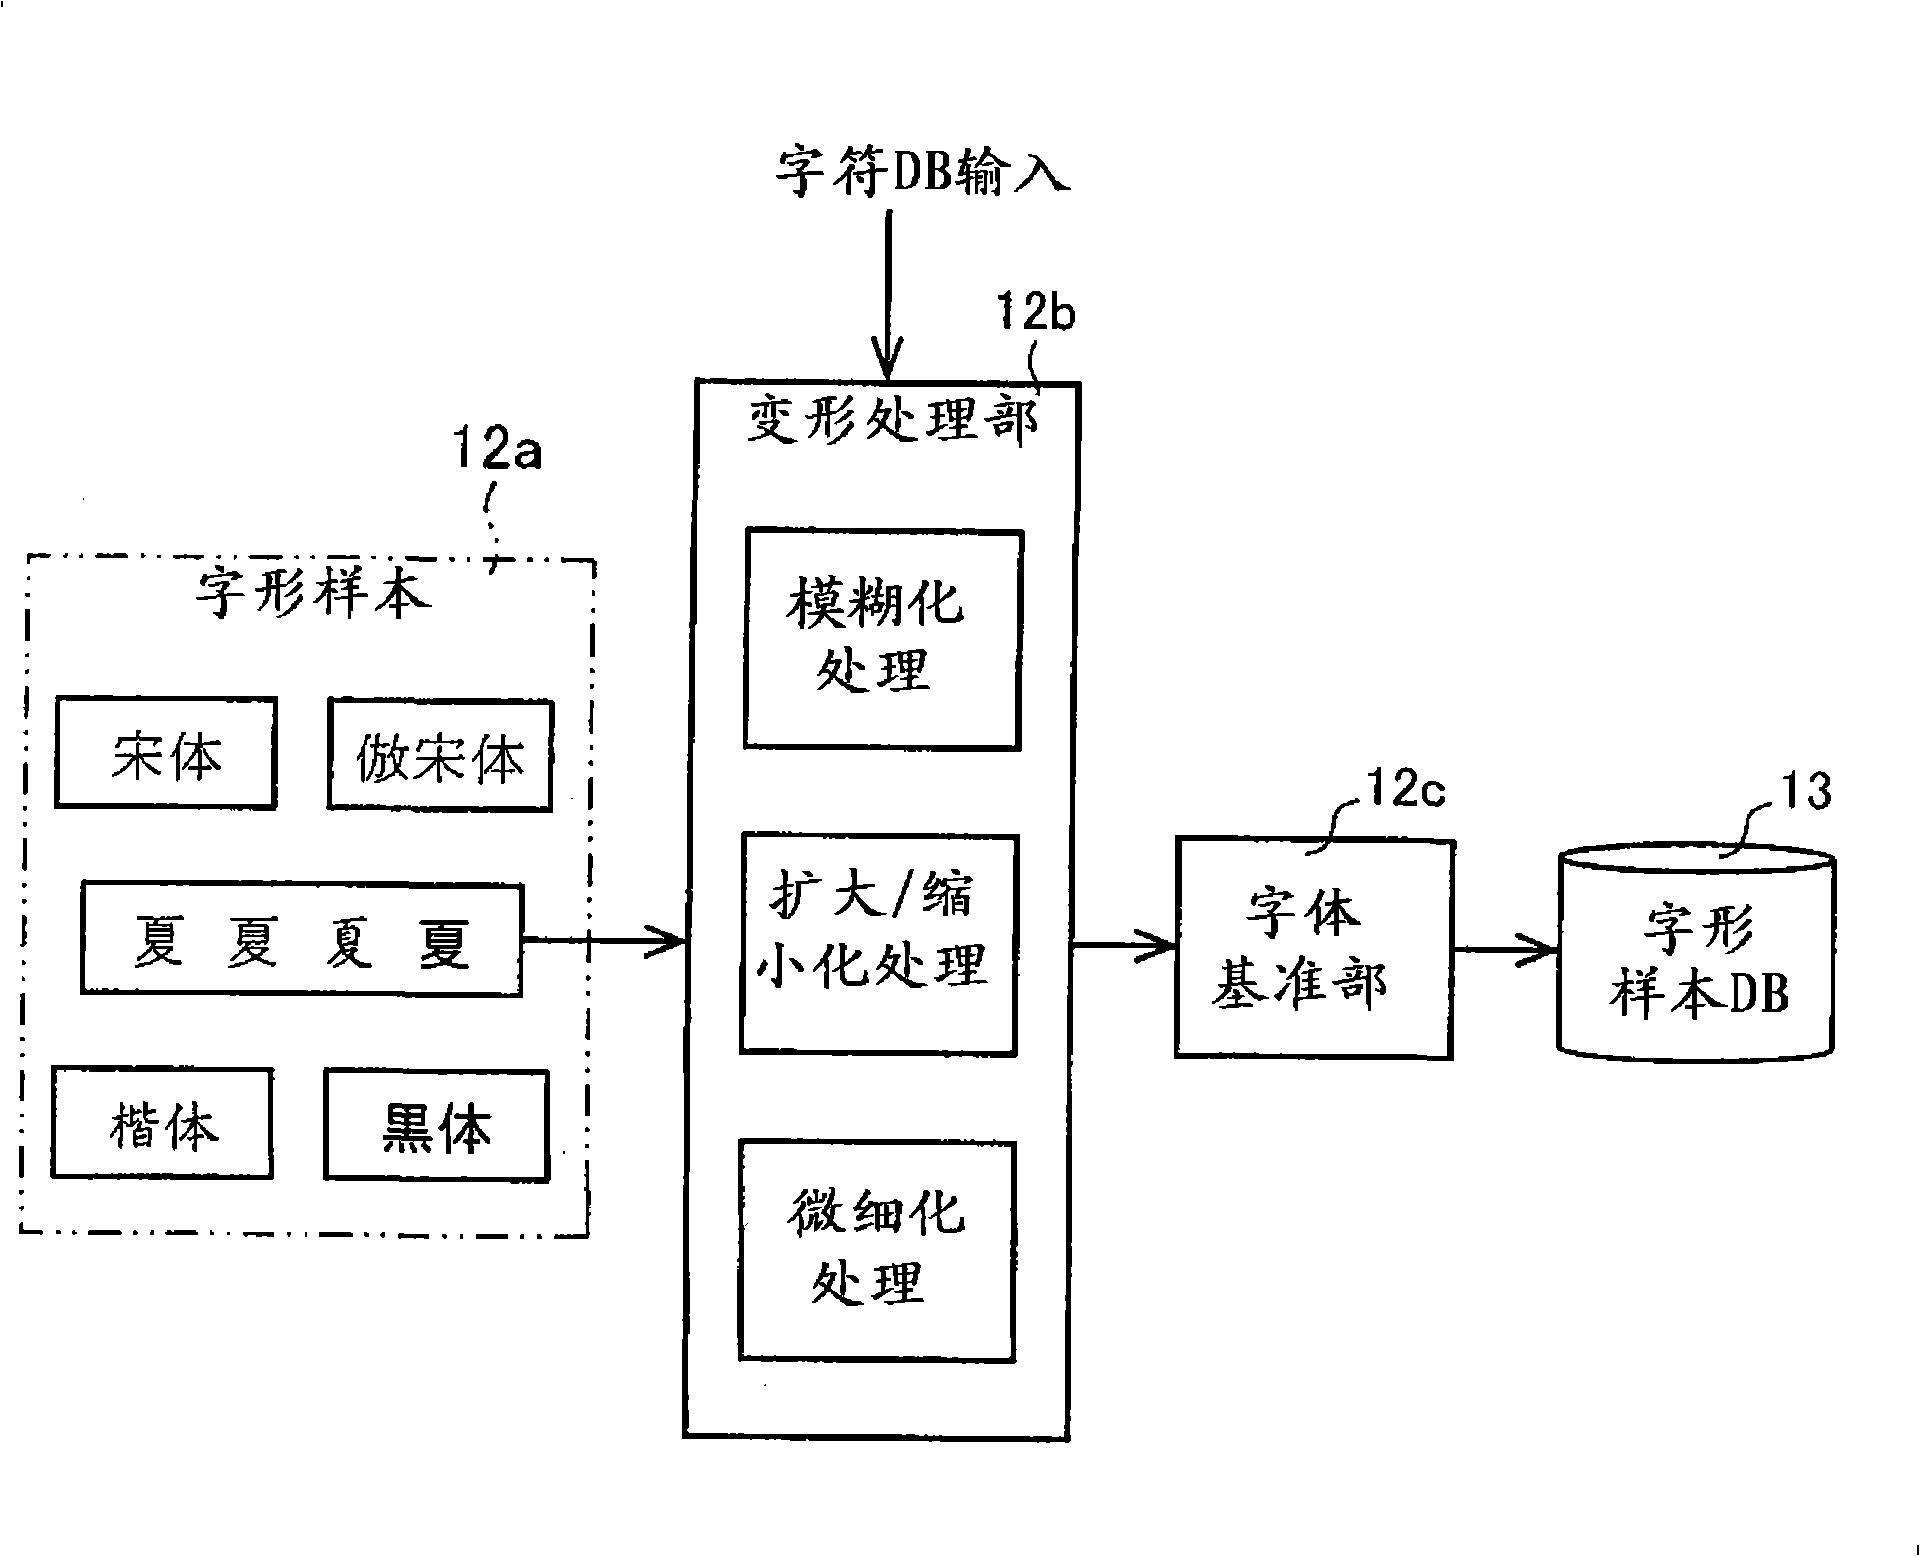 Document image processing apparatus and method